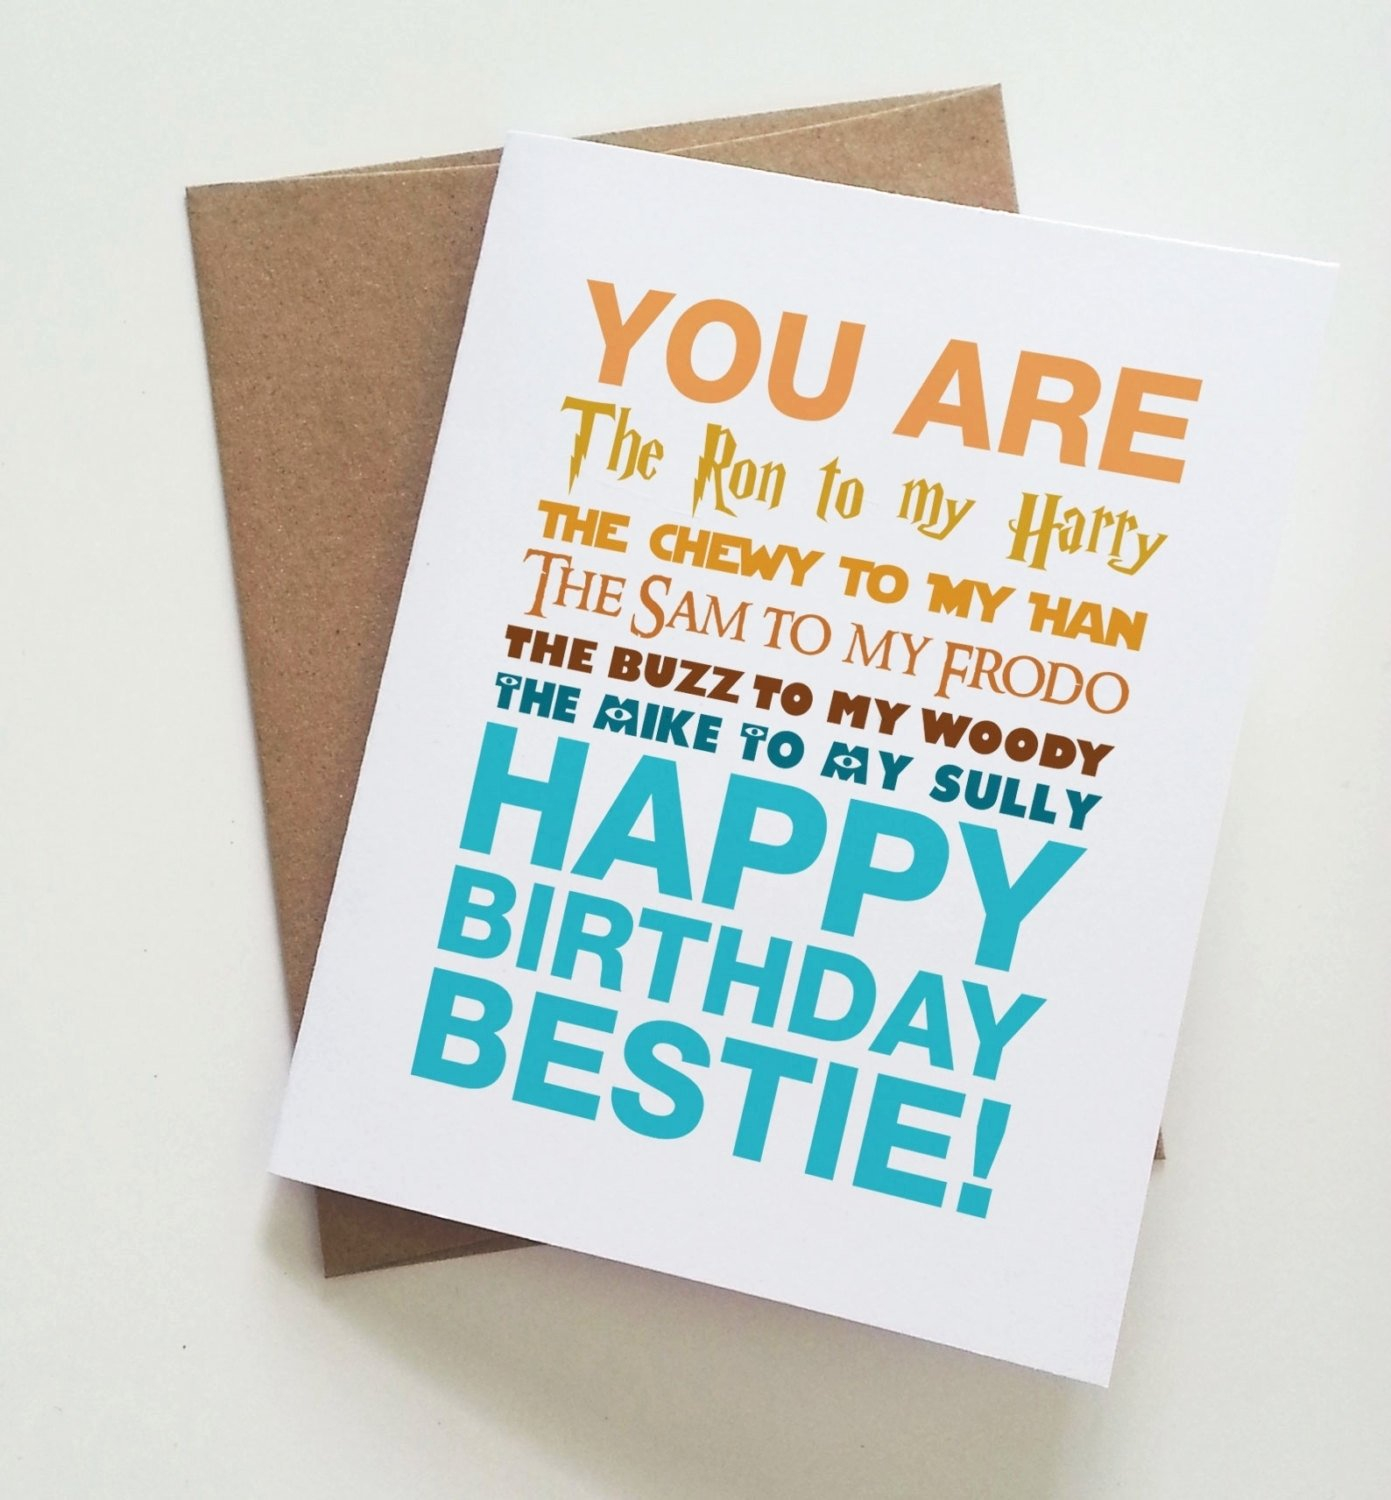 Birthday Cards For Friends Ideas 10 Perfect Best Friend Birthday Card Ideas 2019